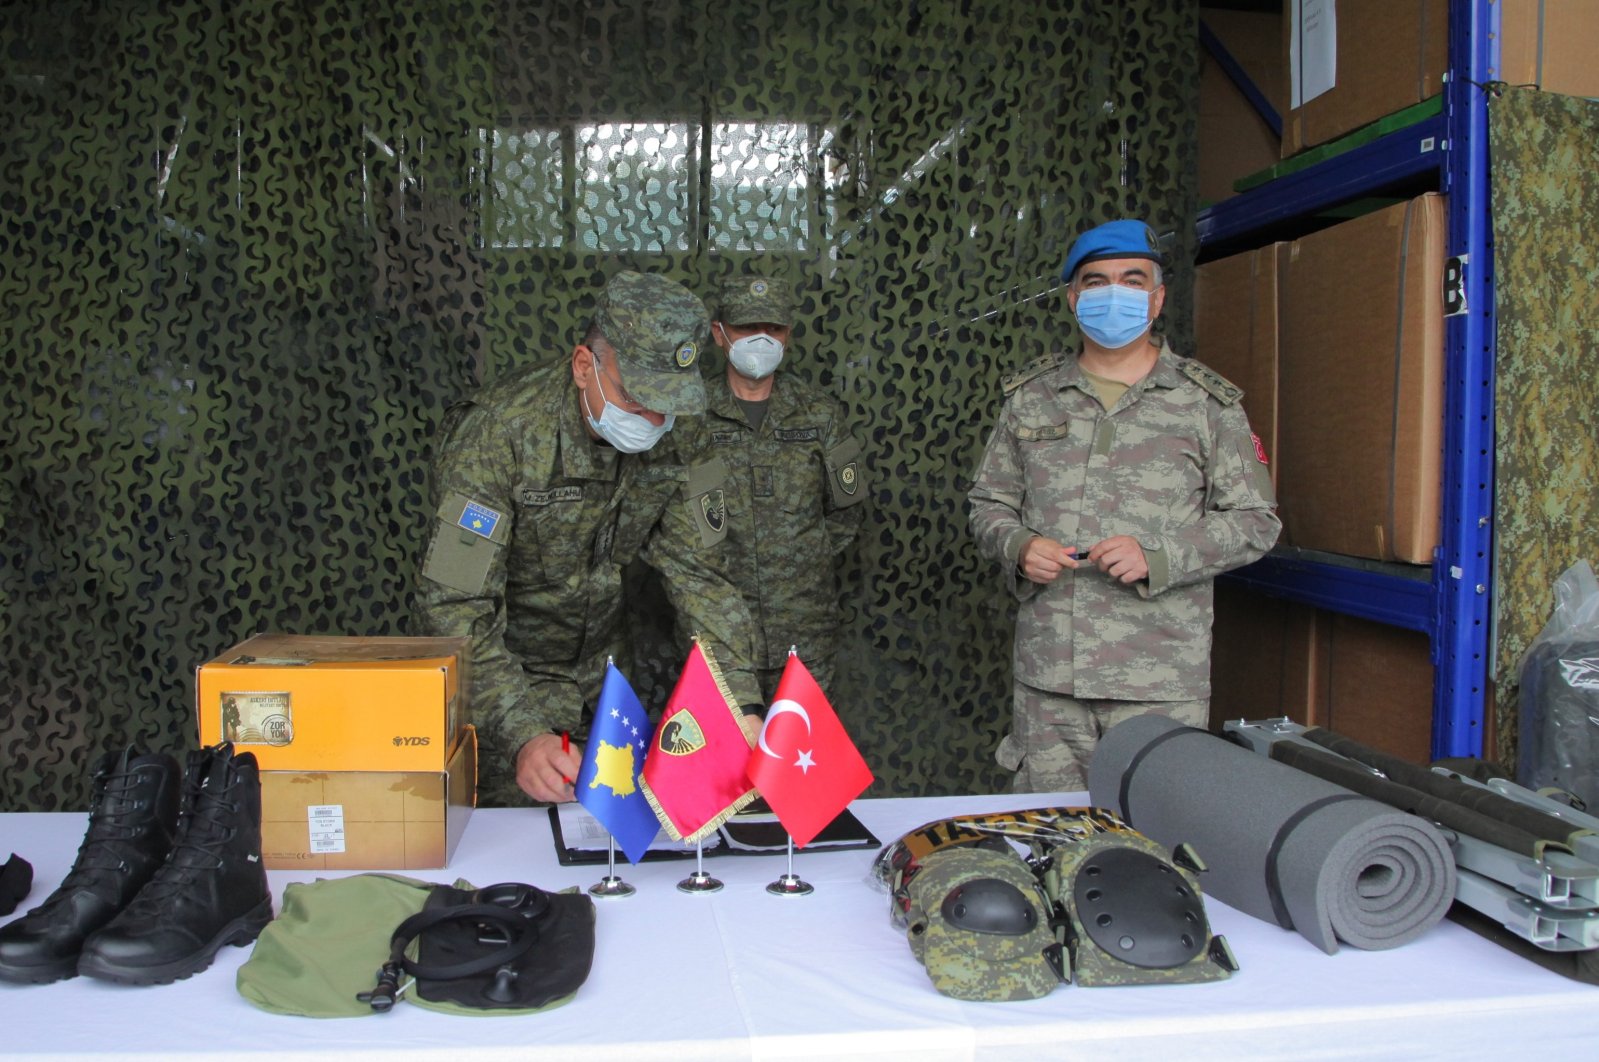 Turkey provides the Kosovo Security Force with $743,000 (TL 5.4 million) worth of donations, Aug. 10, 2020. (AA)